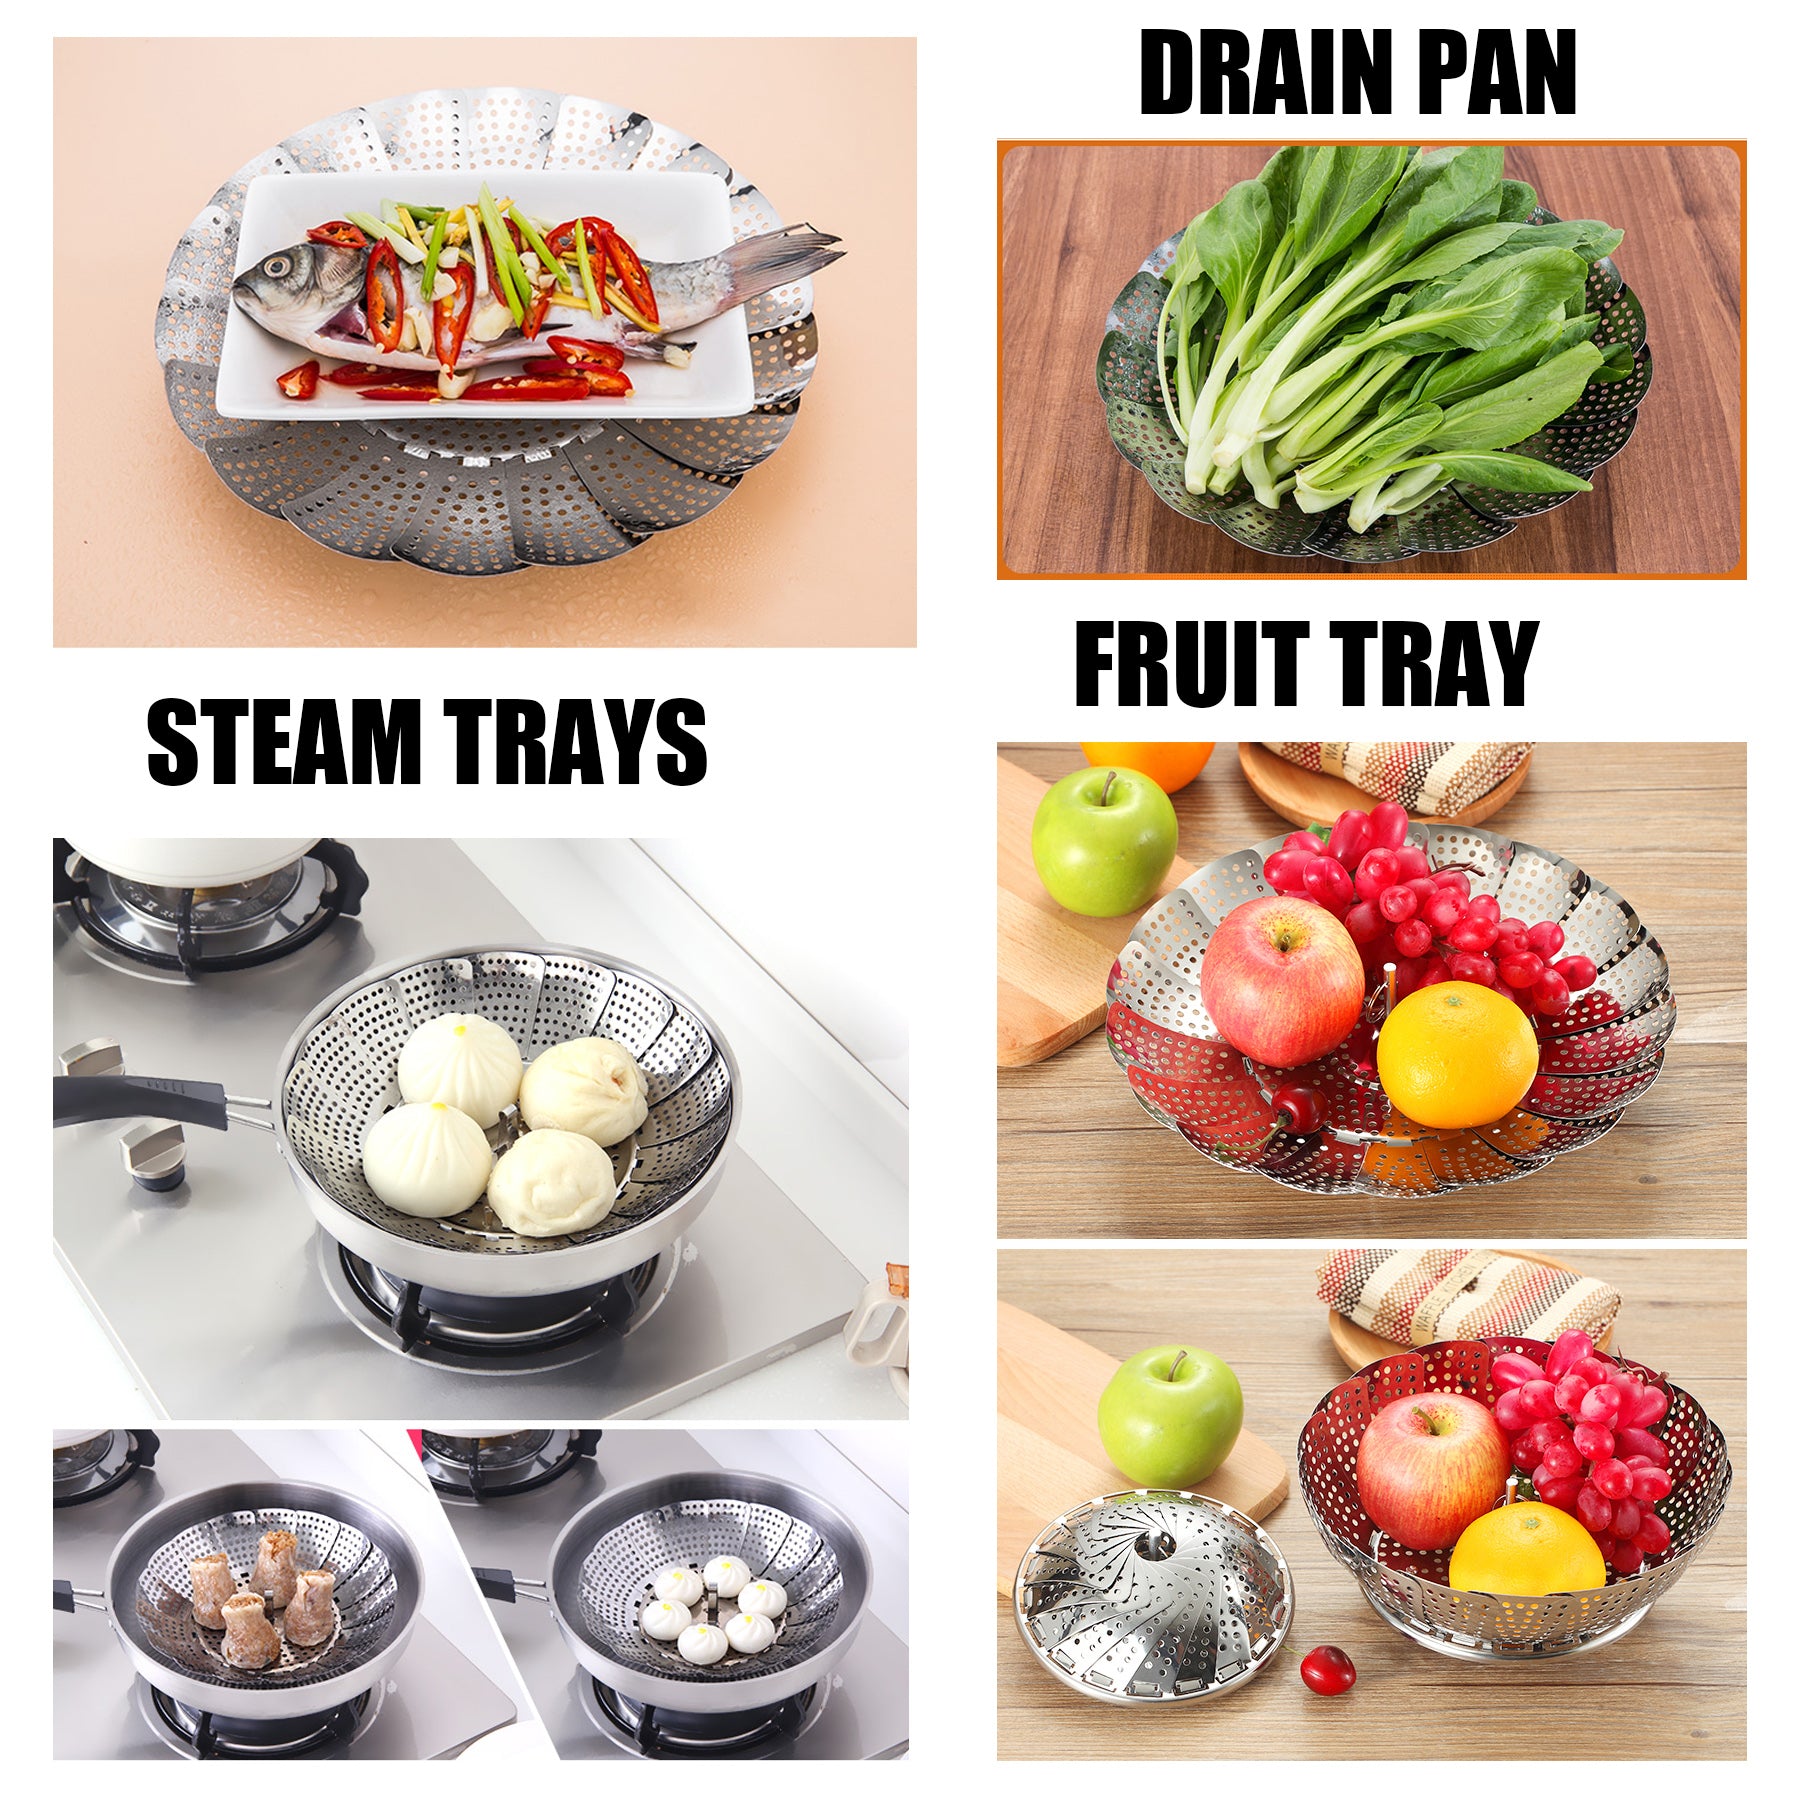 Stainless Steel Food Steamed Instant Pot Steamer Rack Cooker With